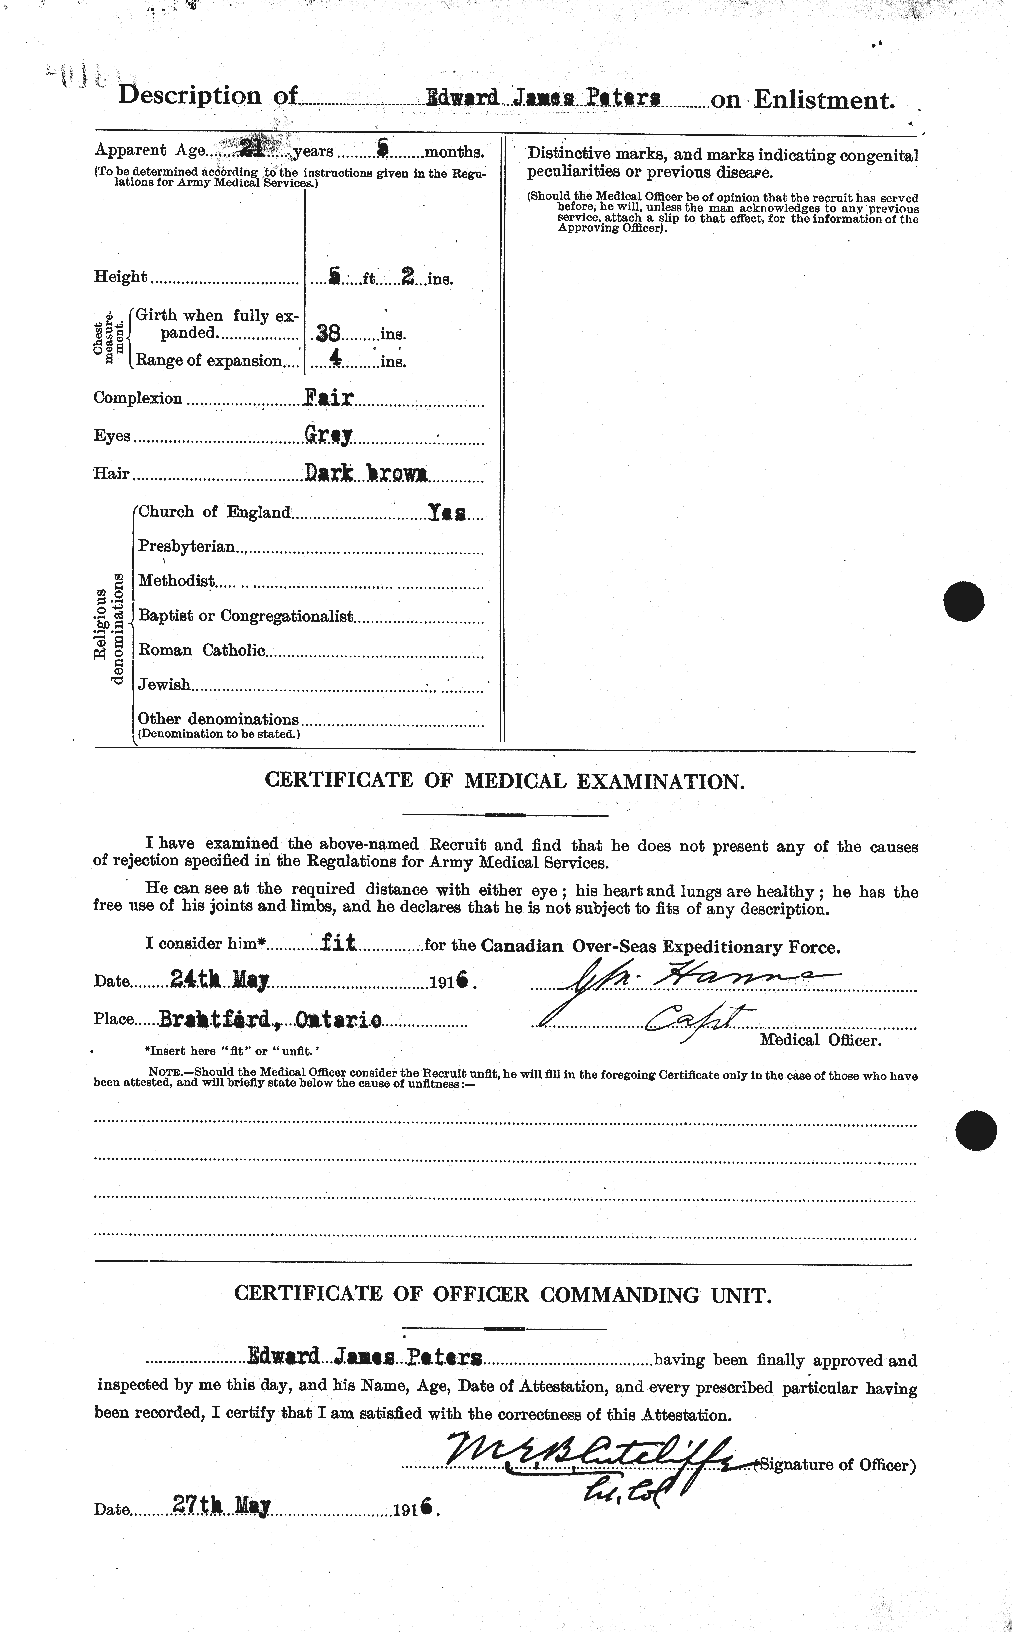 Personnel Records of the First World War - CEF 575409b